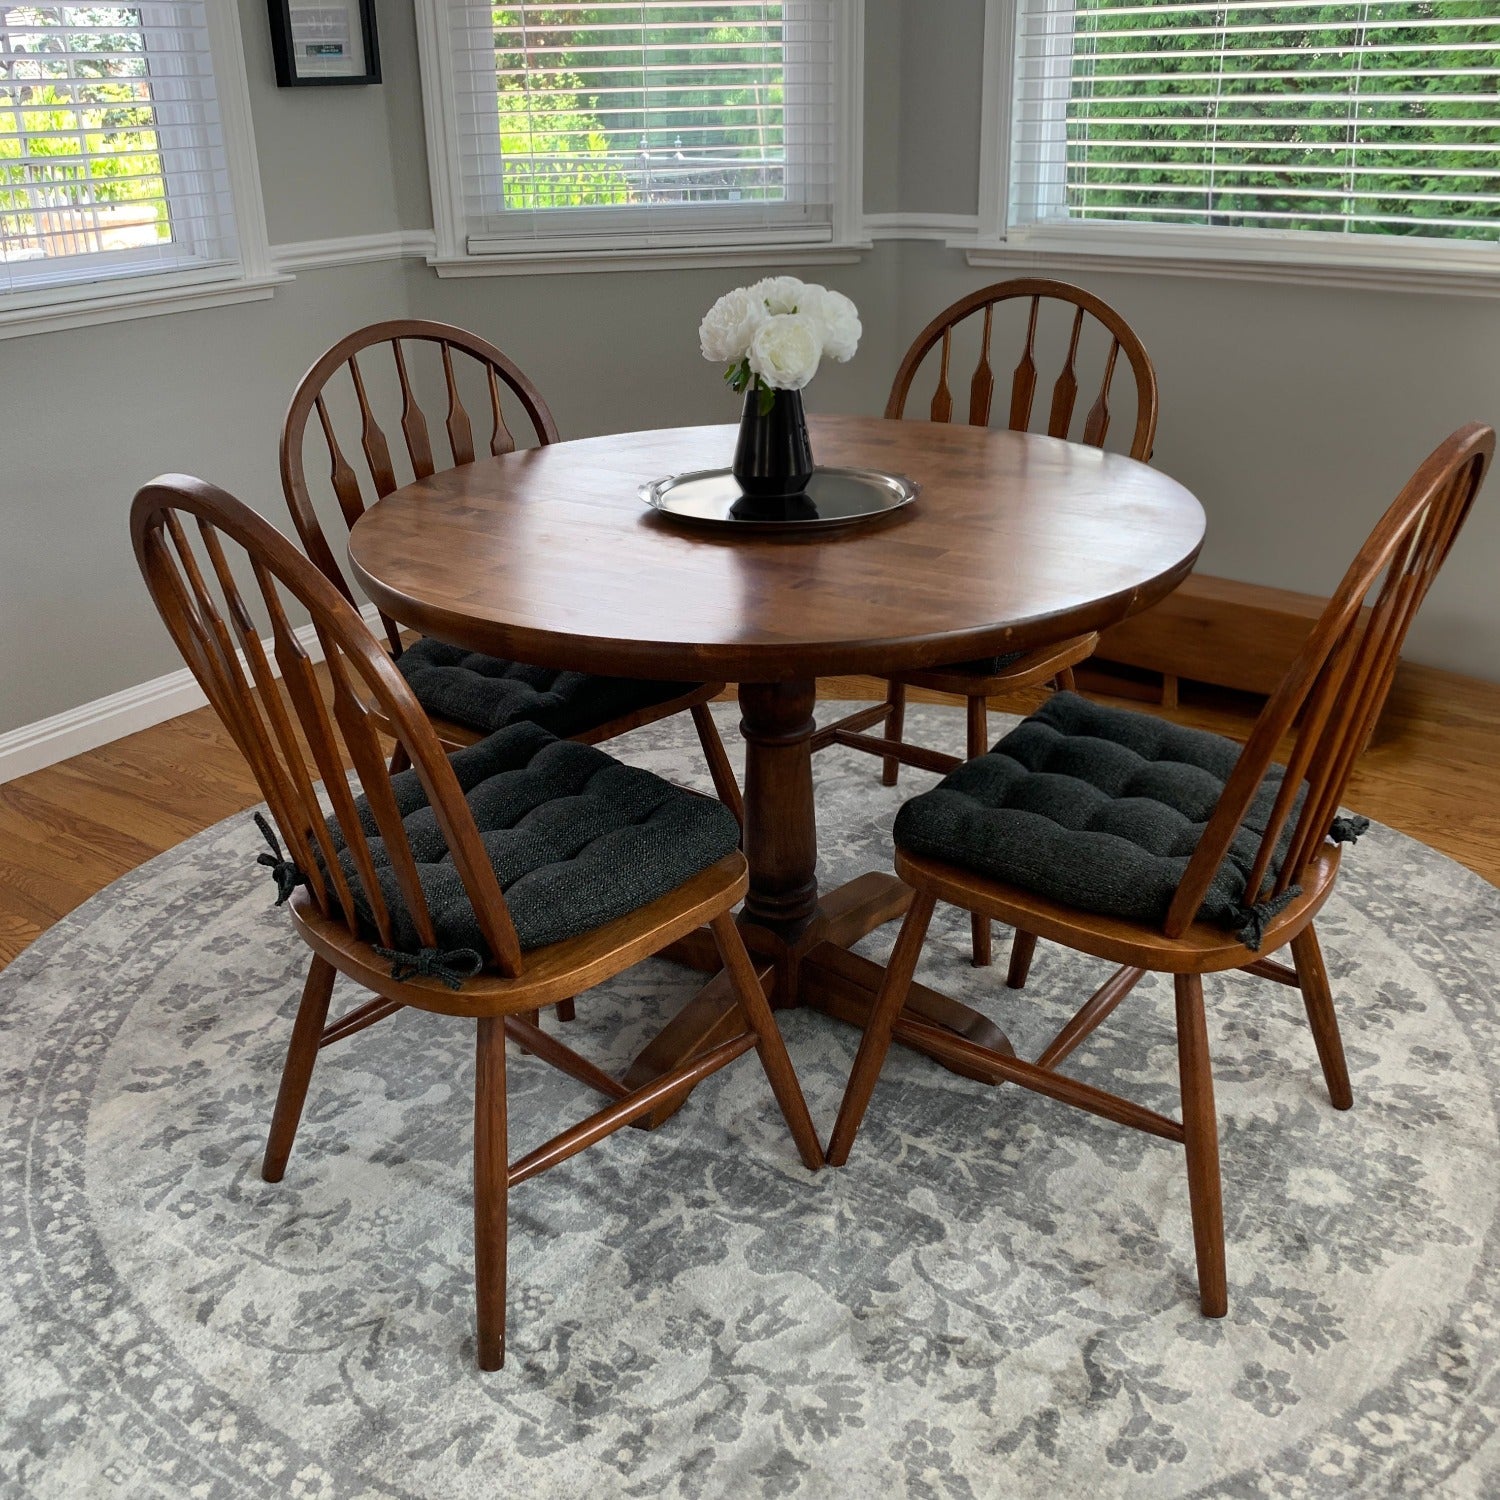 dark gray dining chair pads on windsor chairs in traditional dining room with grey rug and wood dining room chairs